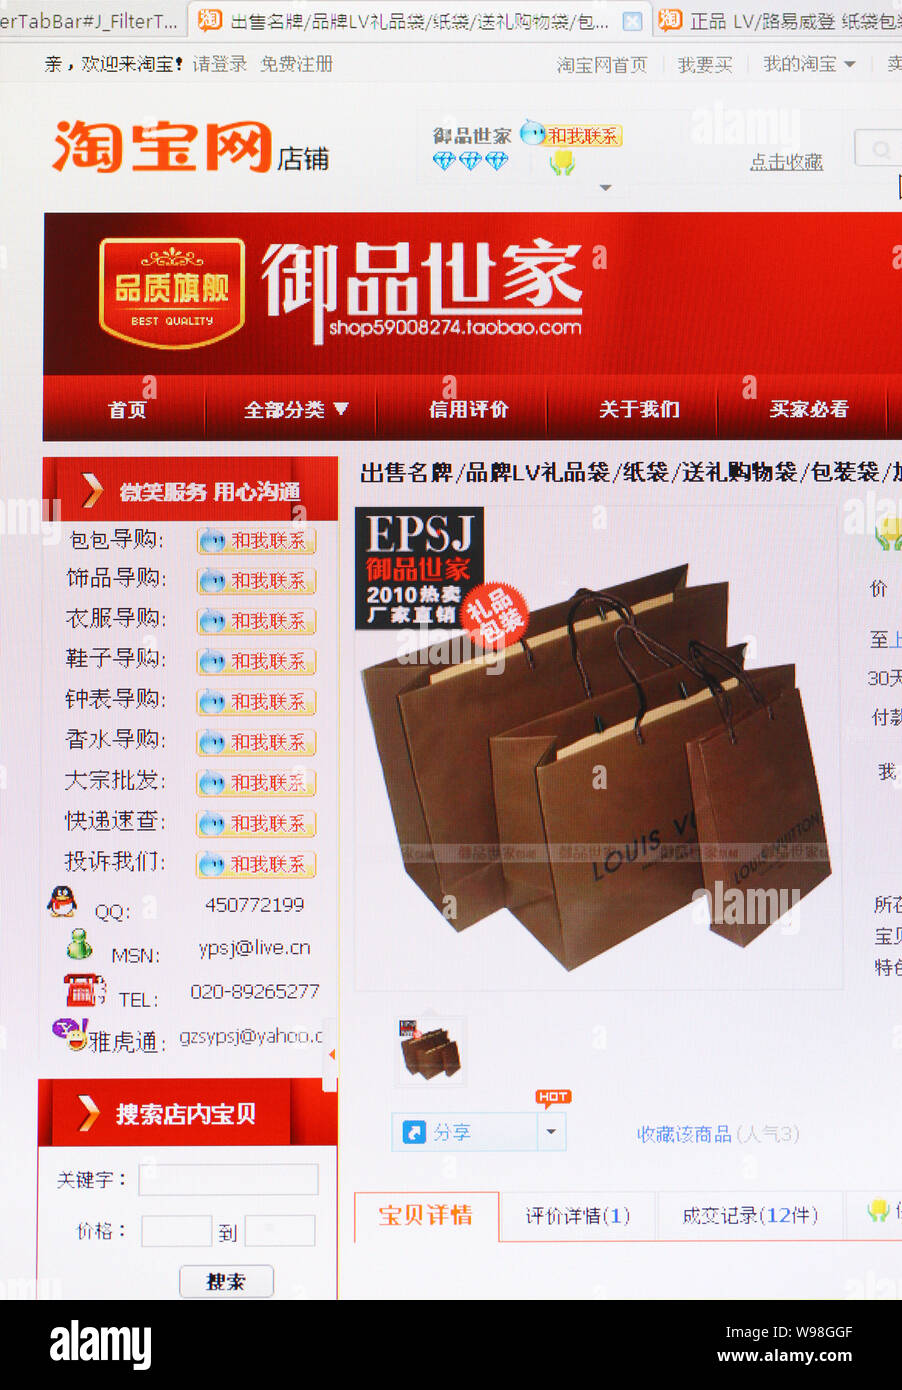 Screen shot taken in Shanghai, China on 25 2011 paper Vuitton shopping bags on Taobao Mall (tmall.com), the online shopping ma Stock Photo - Alamy